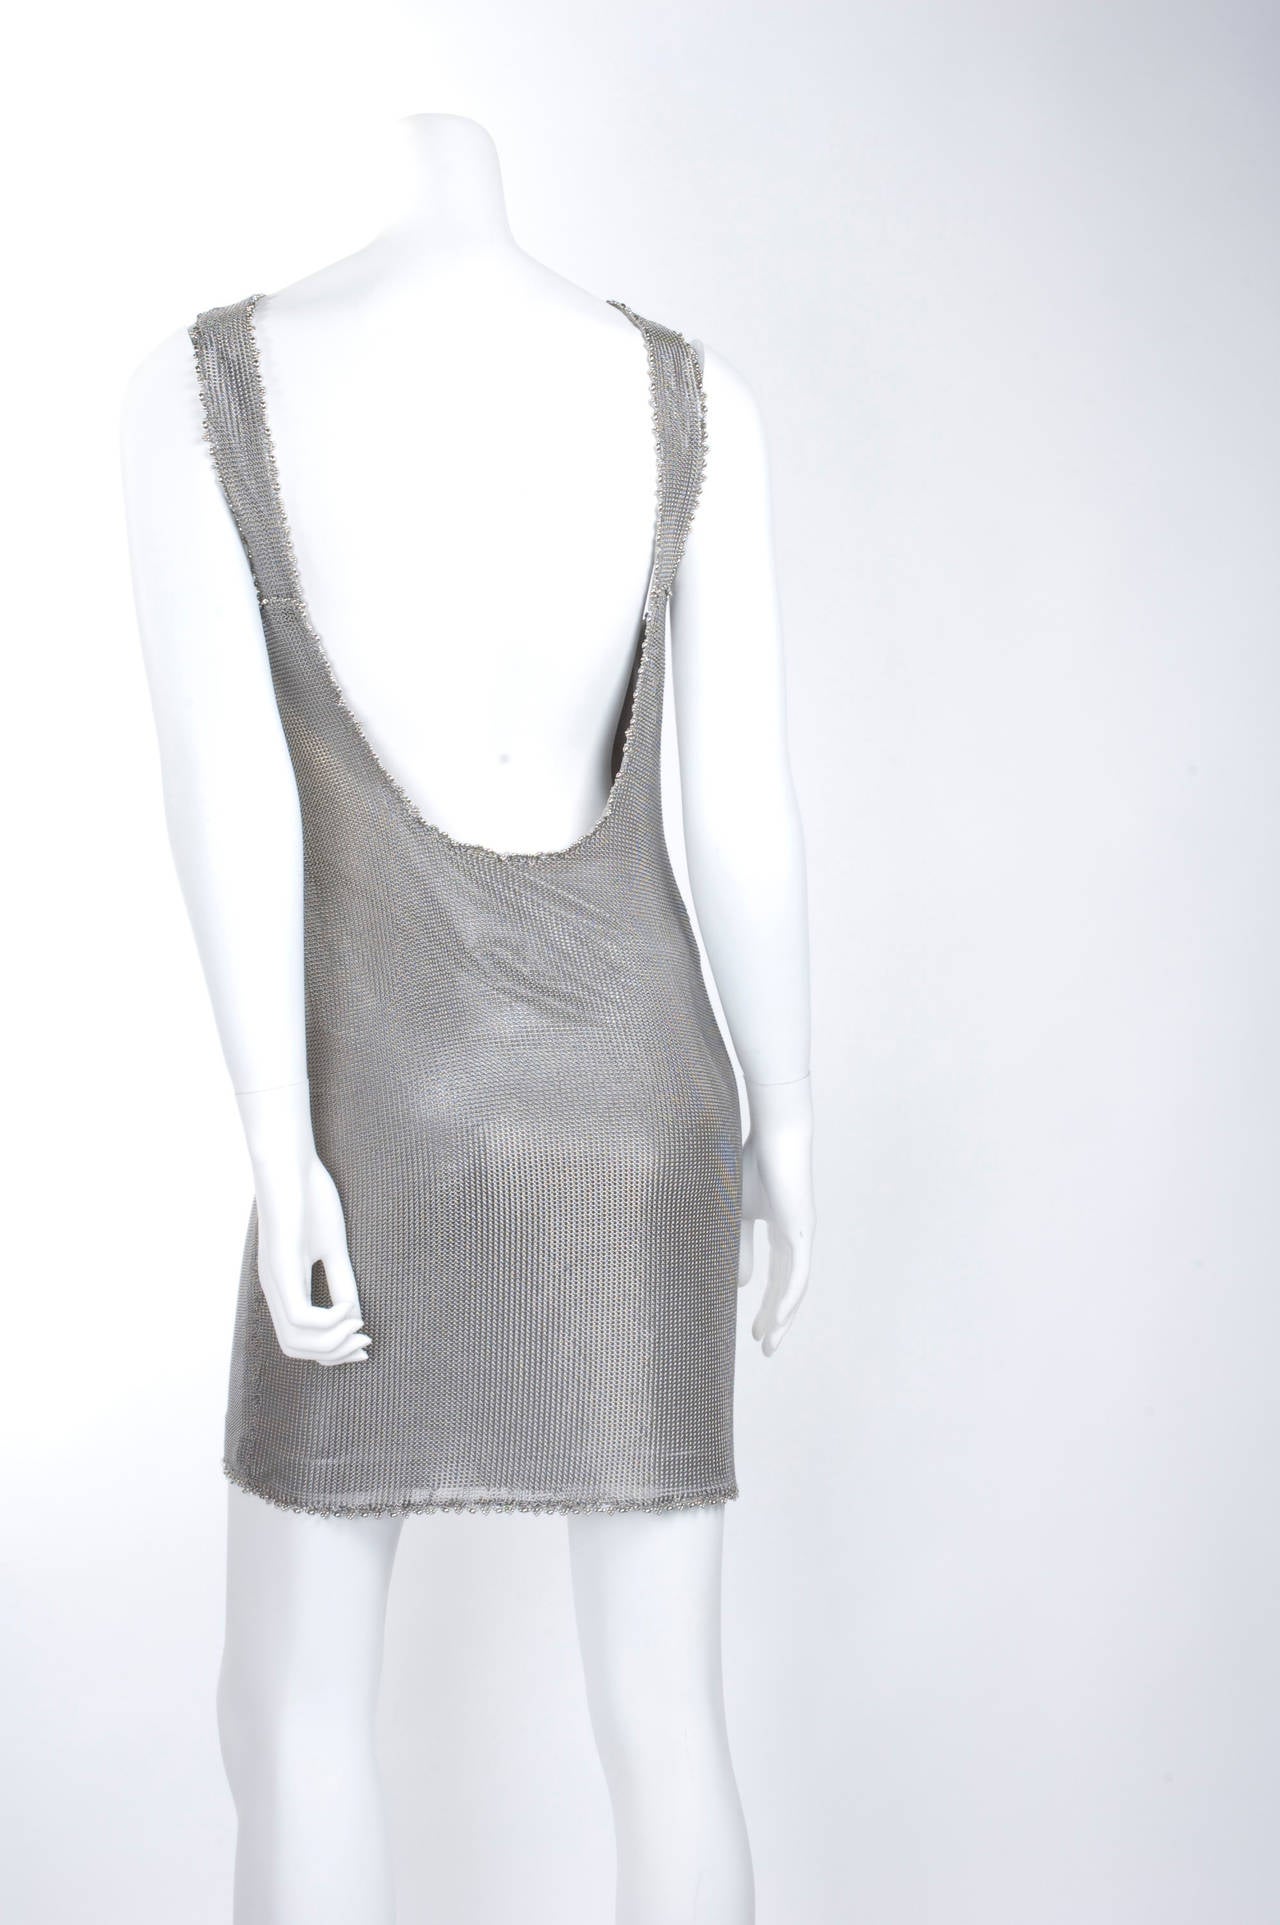 80's Atelier Gianni Versace Chain Link Metal Dress. For Sale 1